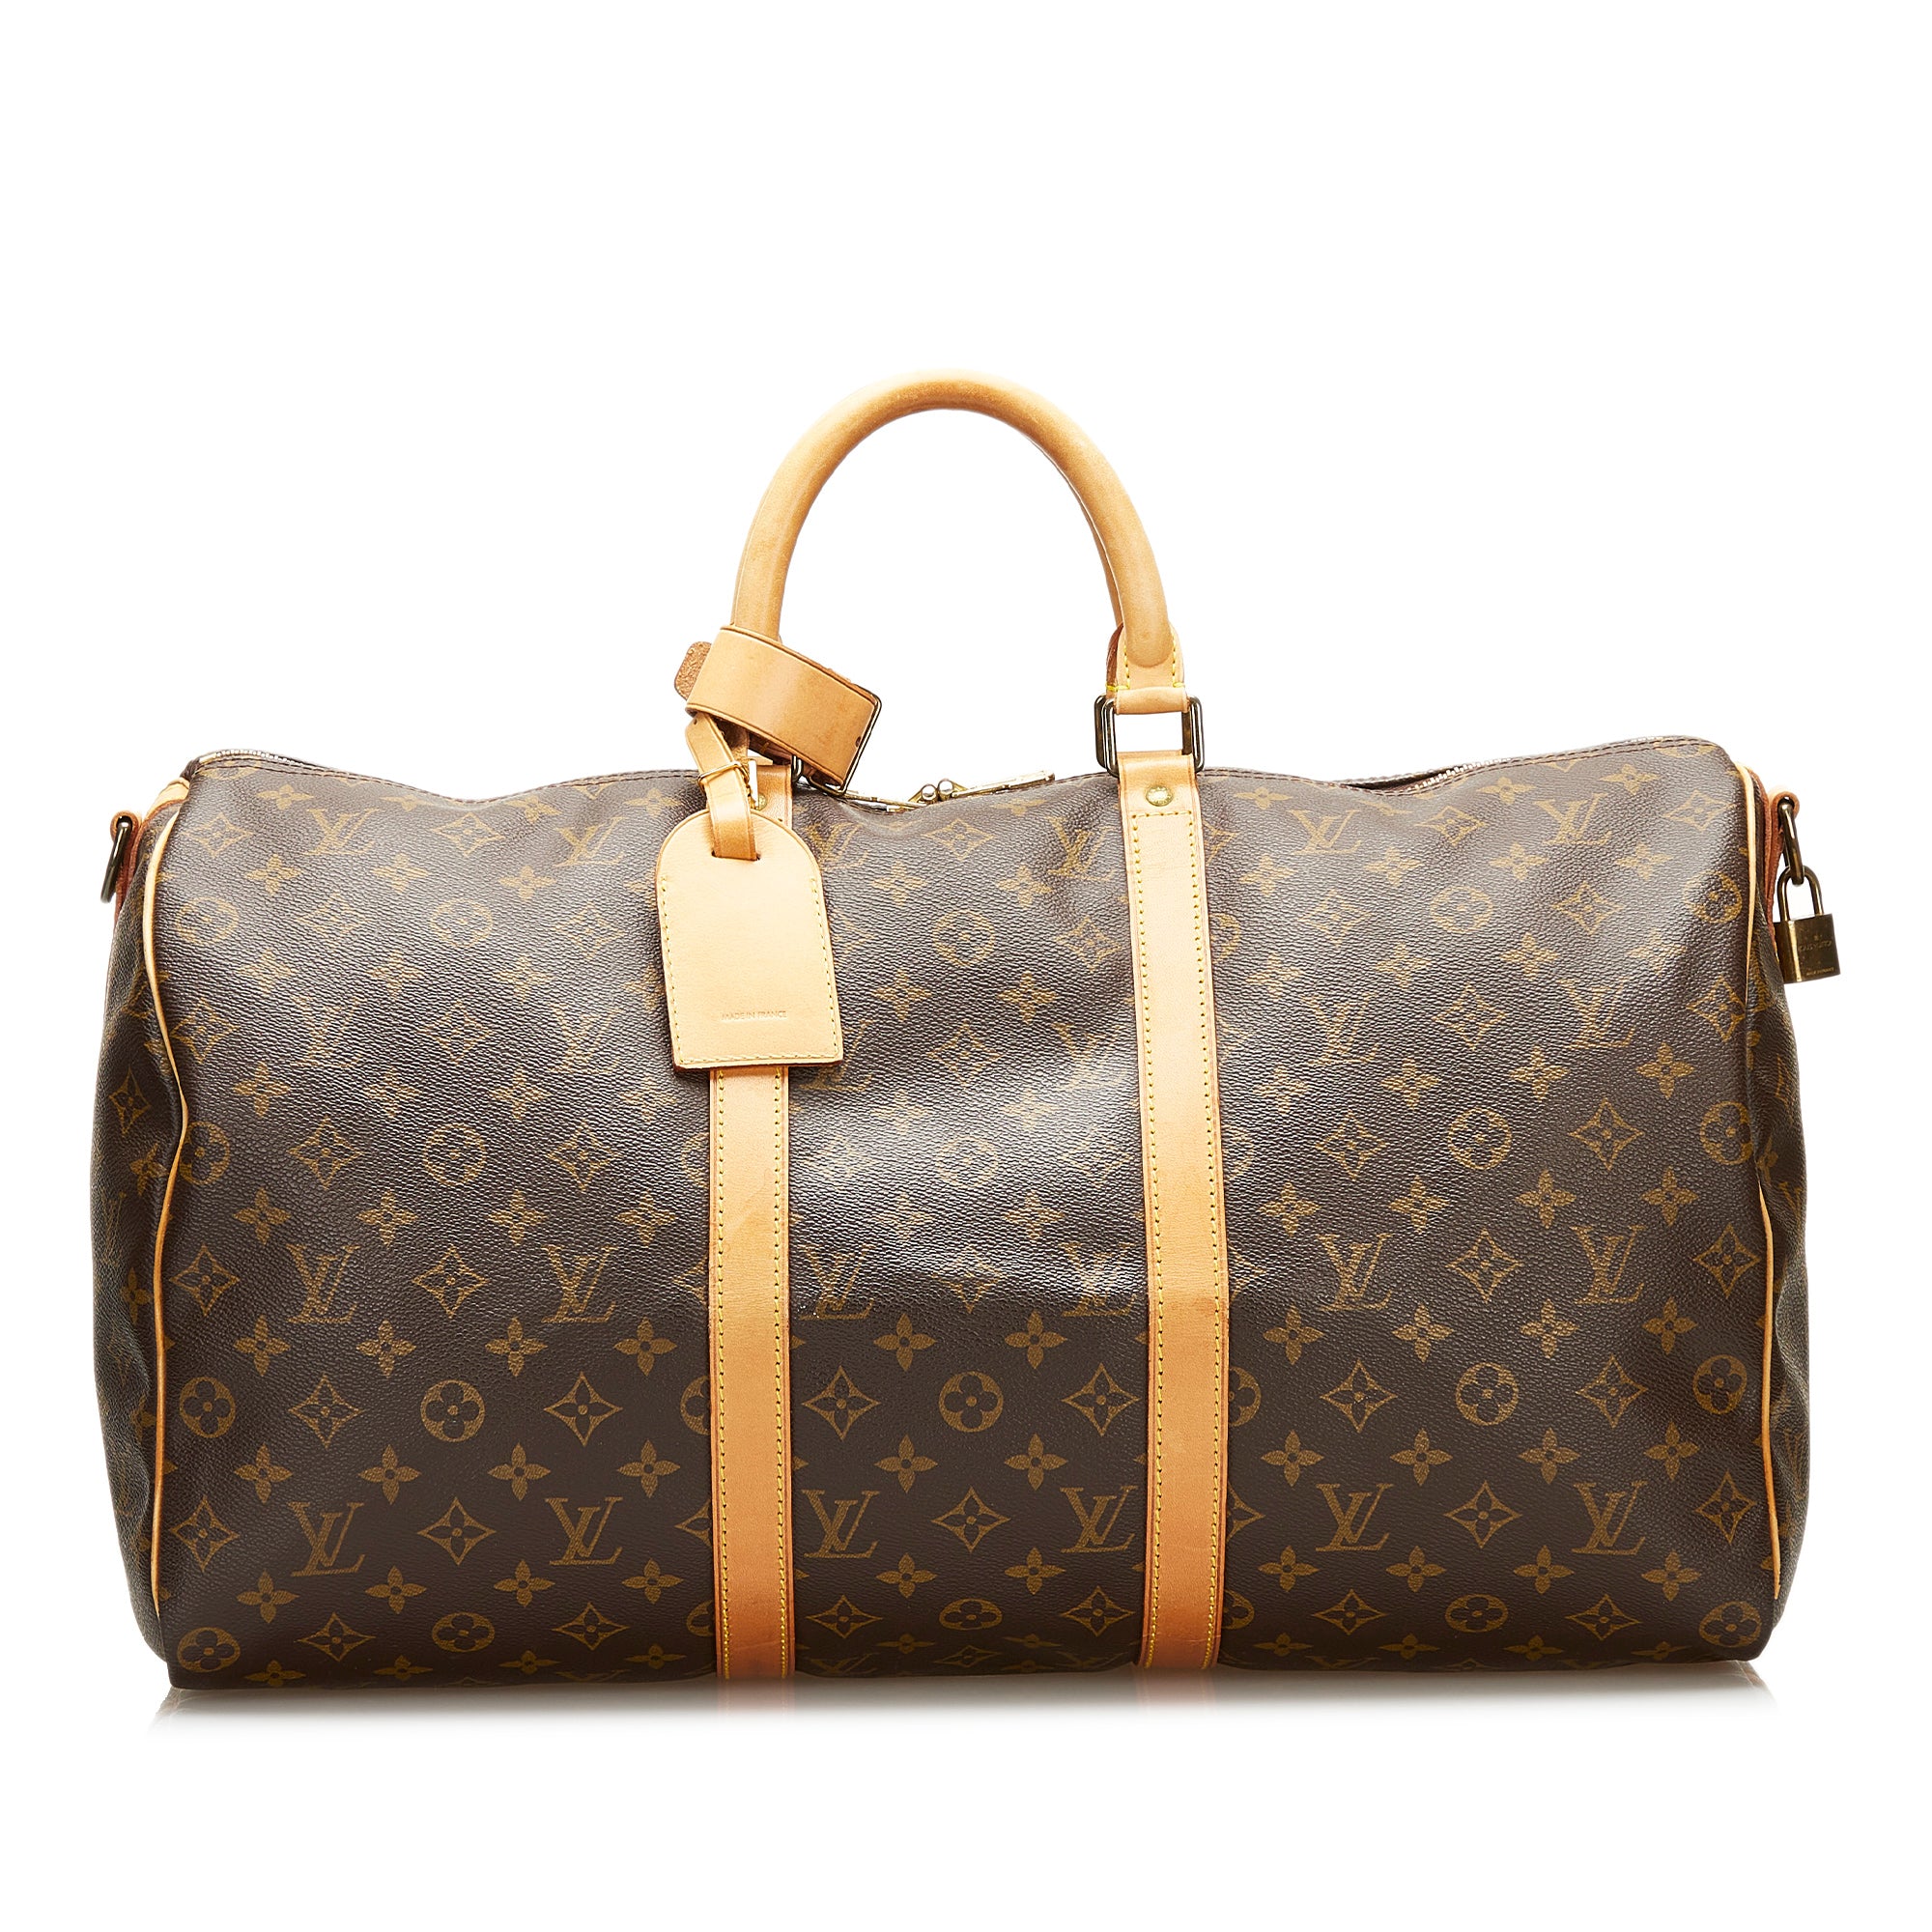 Shop for Louis Vuitton Monogram Canvas Leather Sac Flanerie 50 cm Shoulder  Bag - Shipped from USA